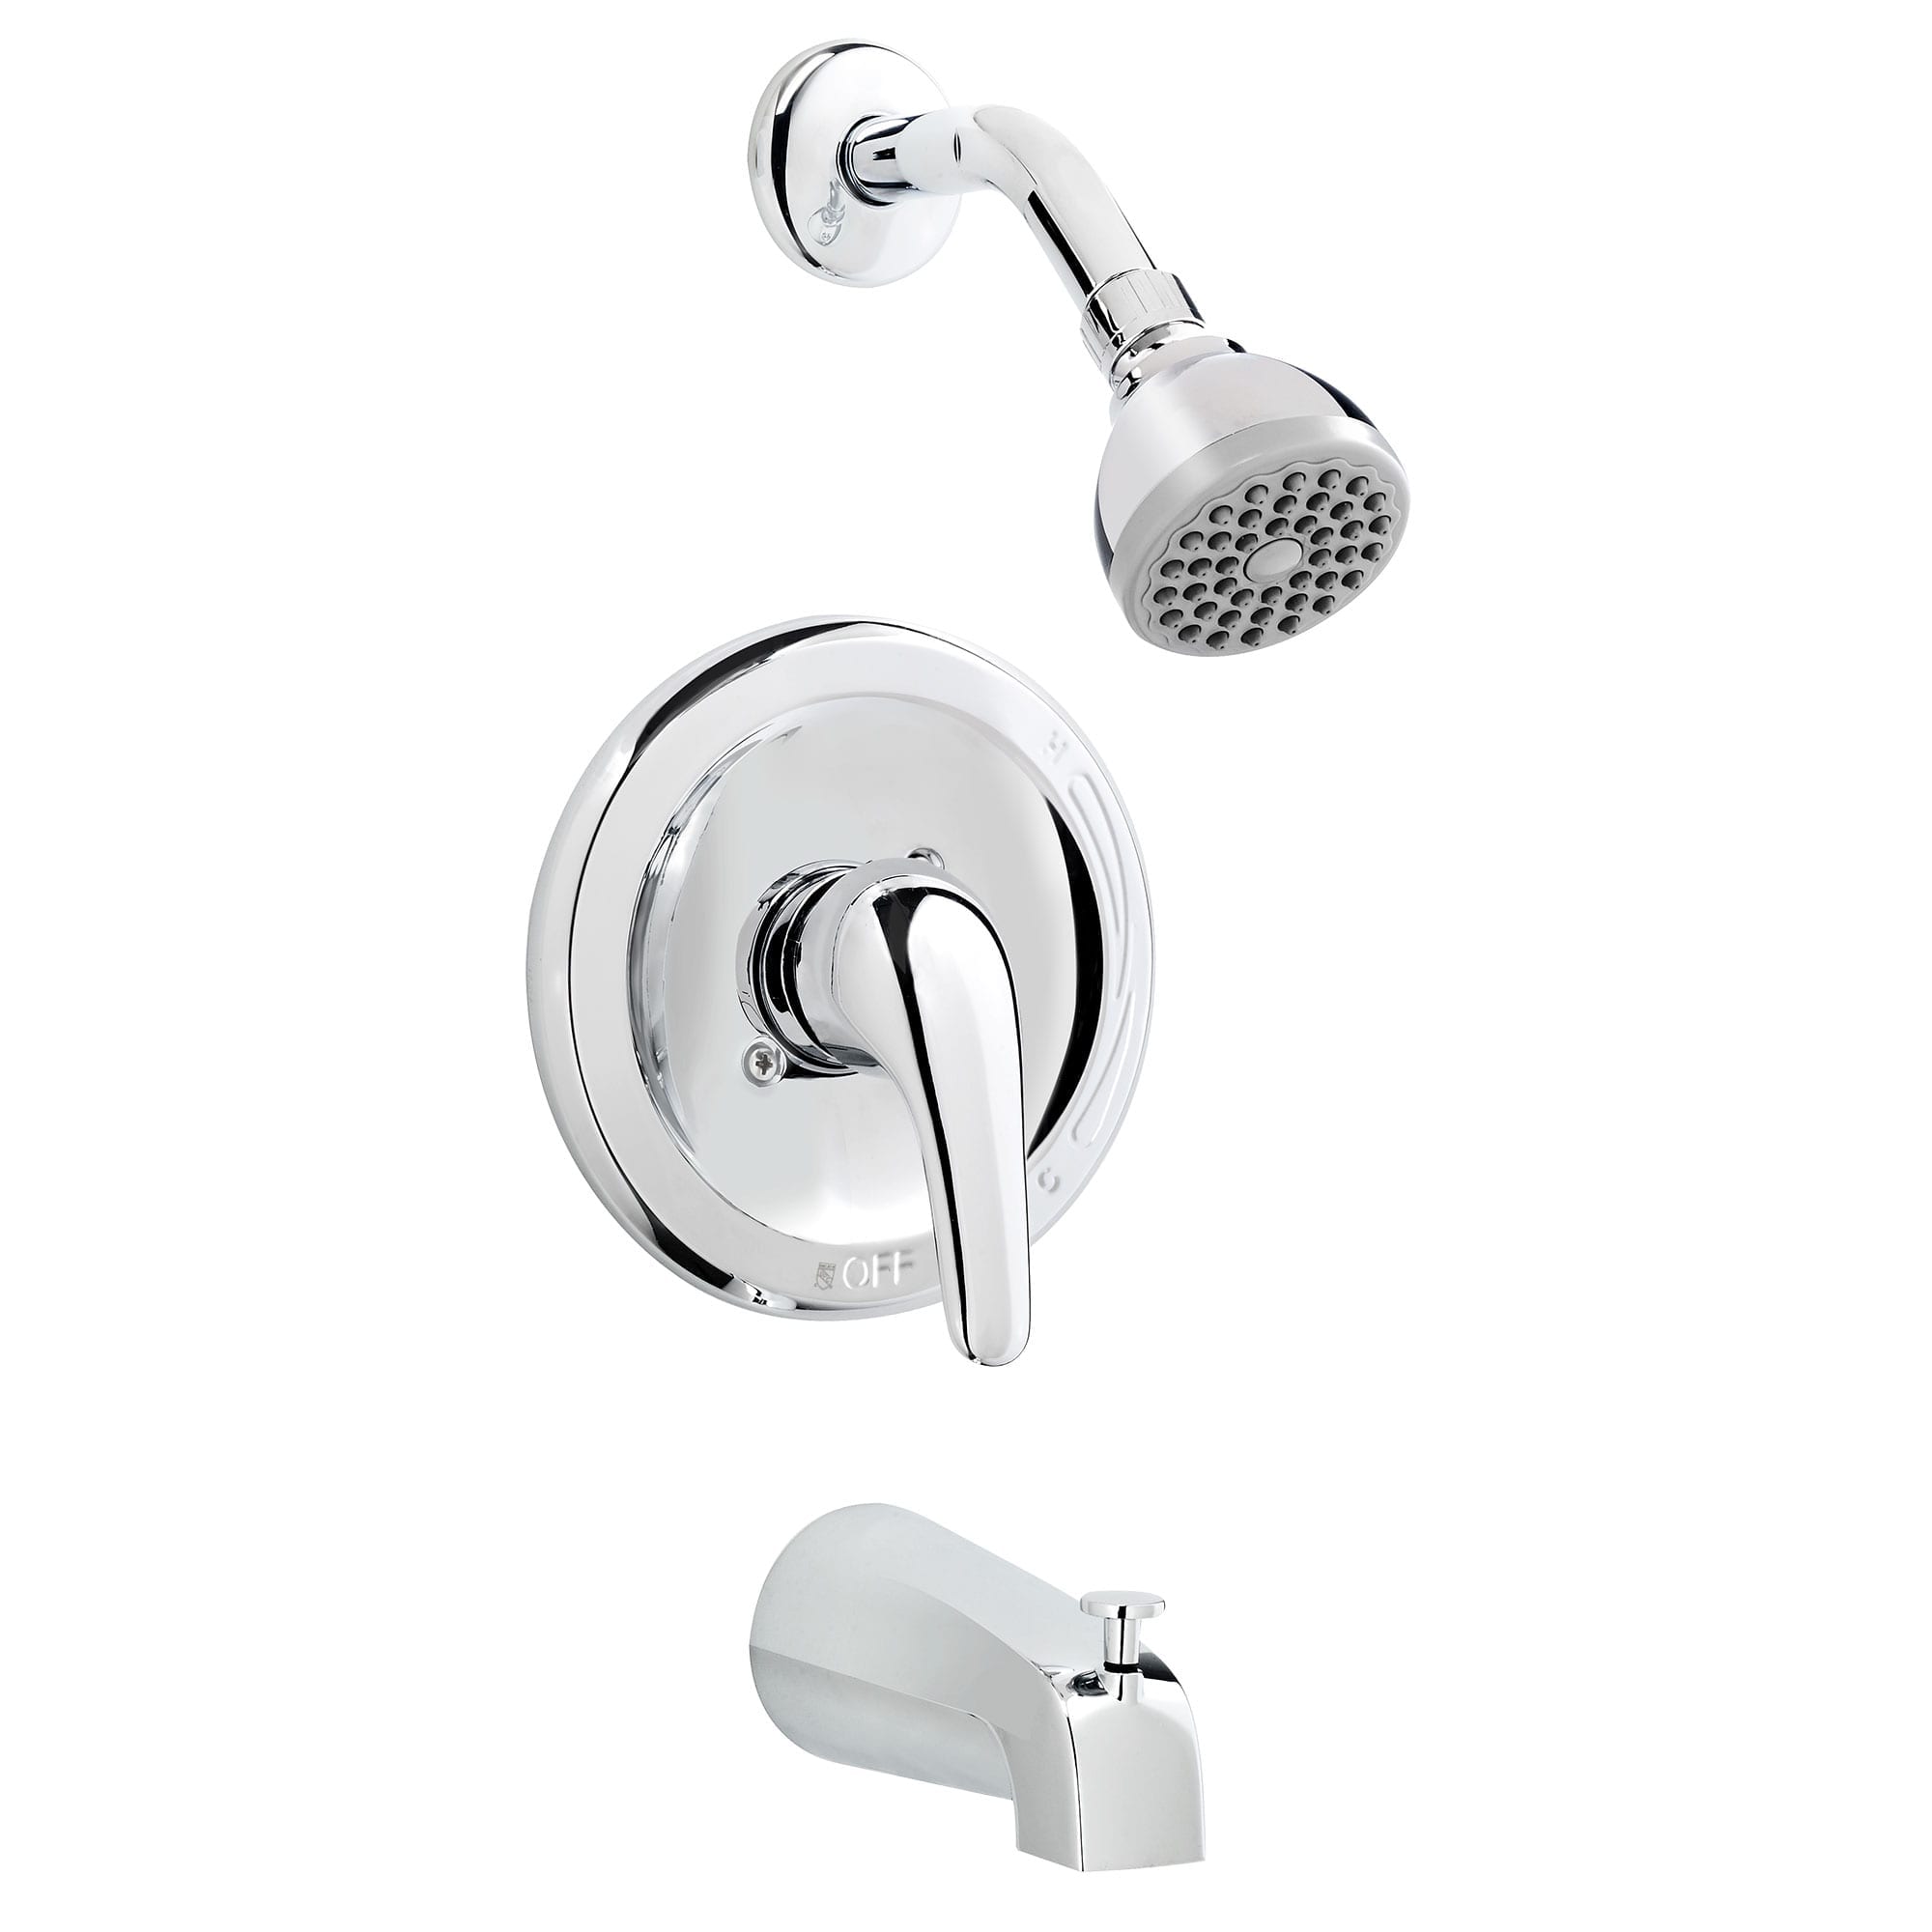 Eby90ccp 7.48 X 9.45 X 5.12 In. Bathtub & Shower Faucet With 1 Handle, Polished Chrome